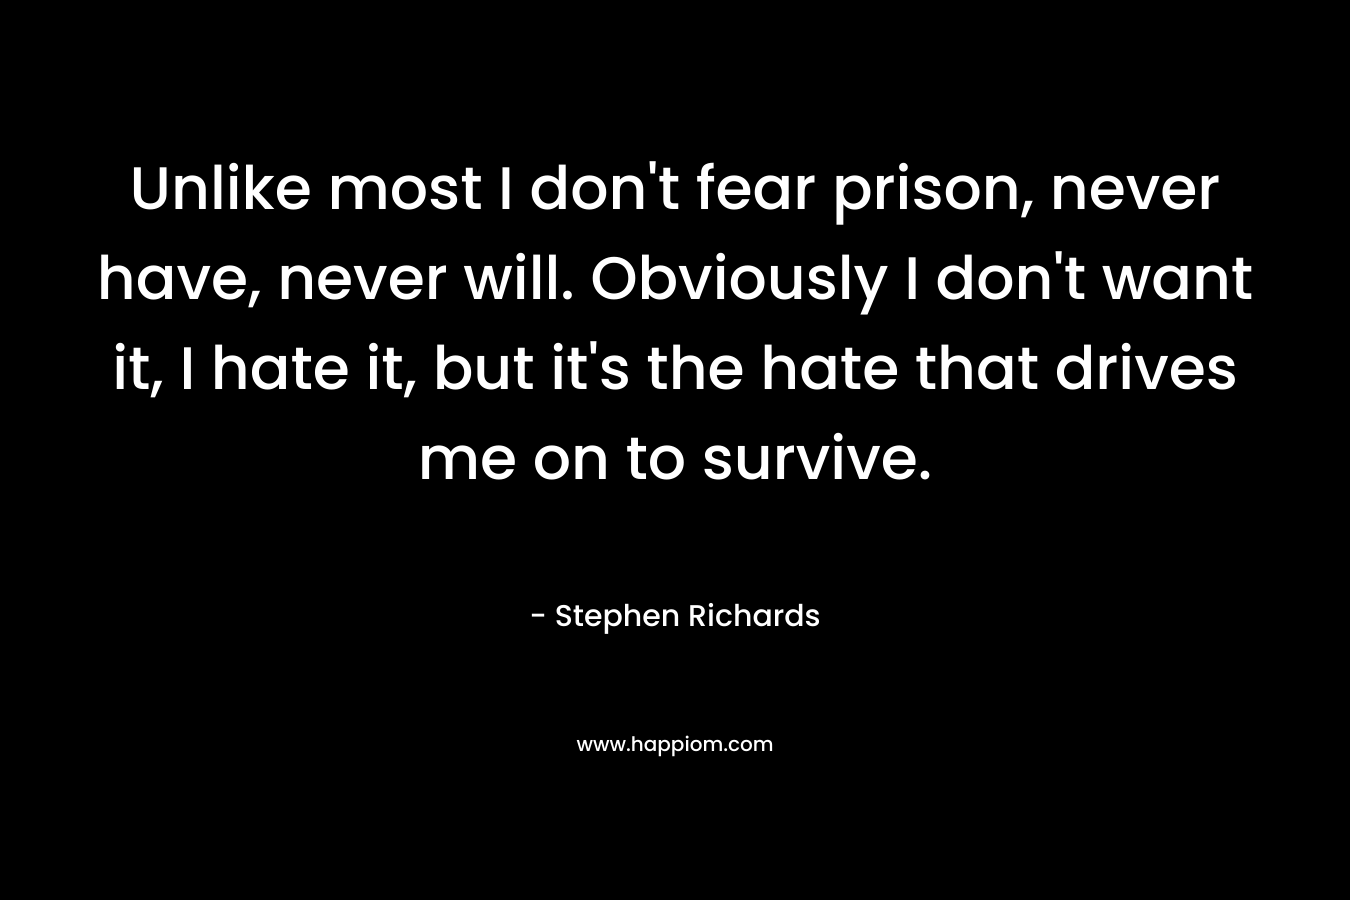 Unlike most I don’t fear prison, never have, never will. Obviously I don’t want it, I hate it, but it’s the hate that drives me on to survive. – Stephen Richards